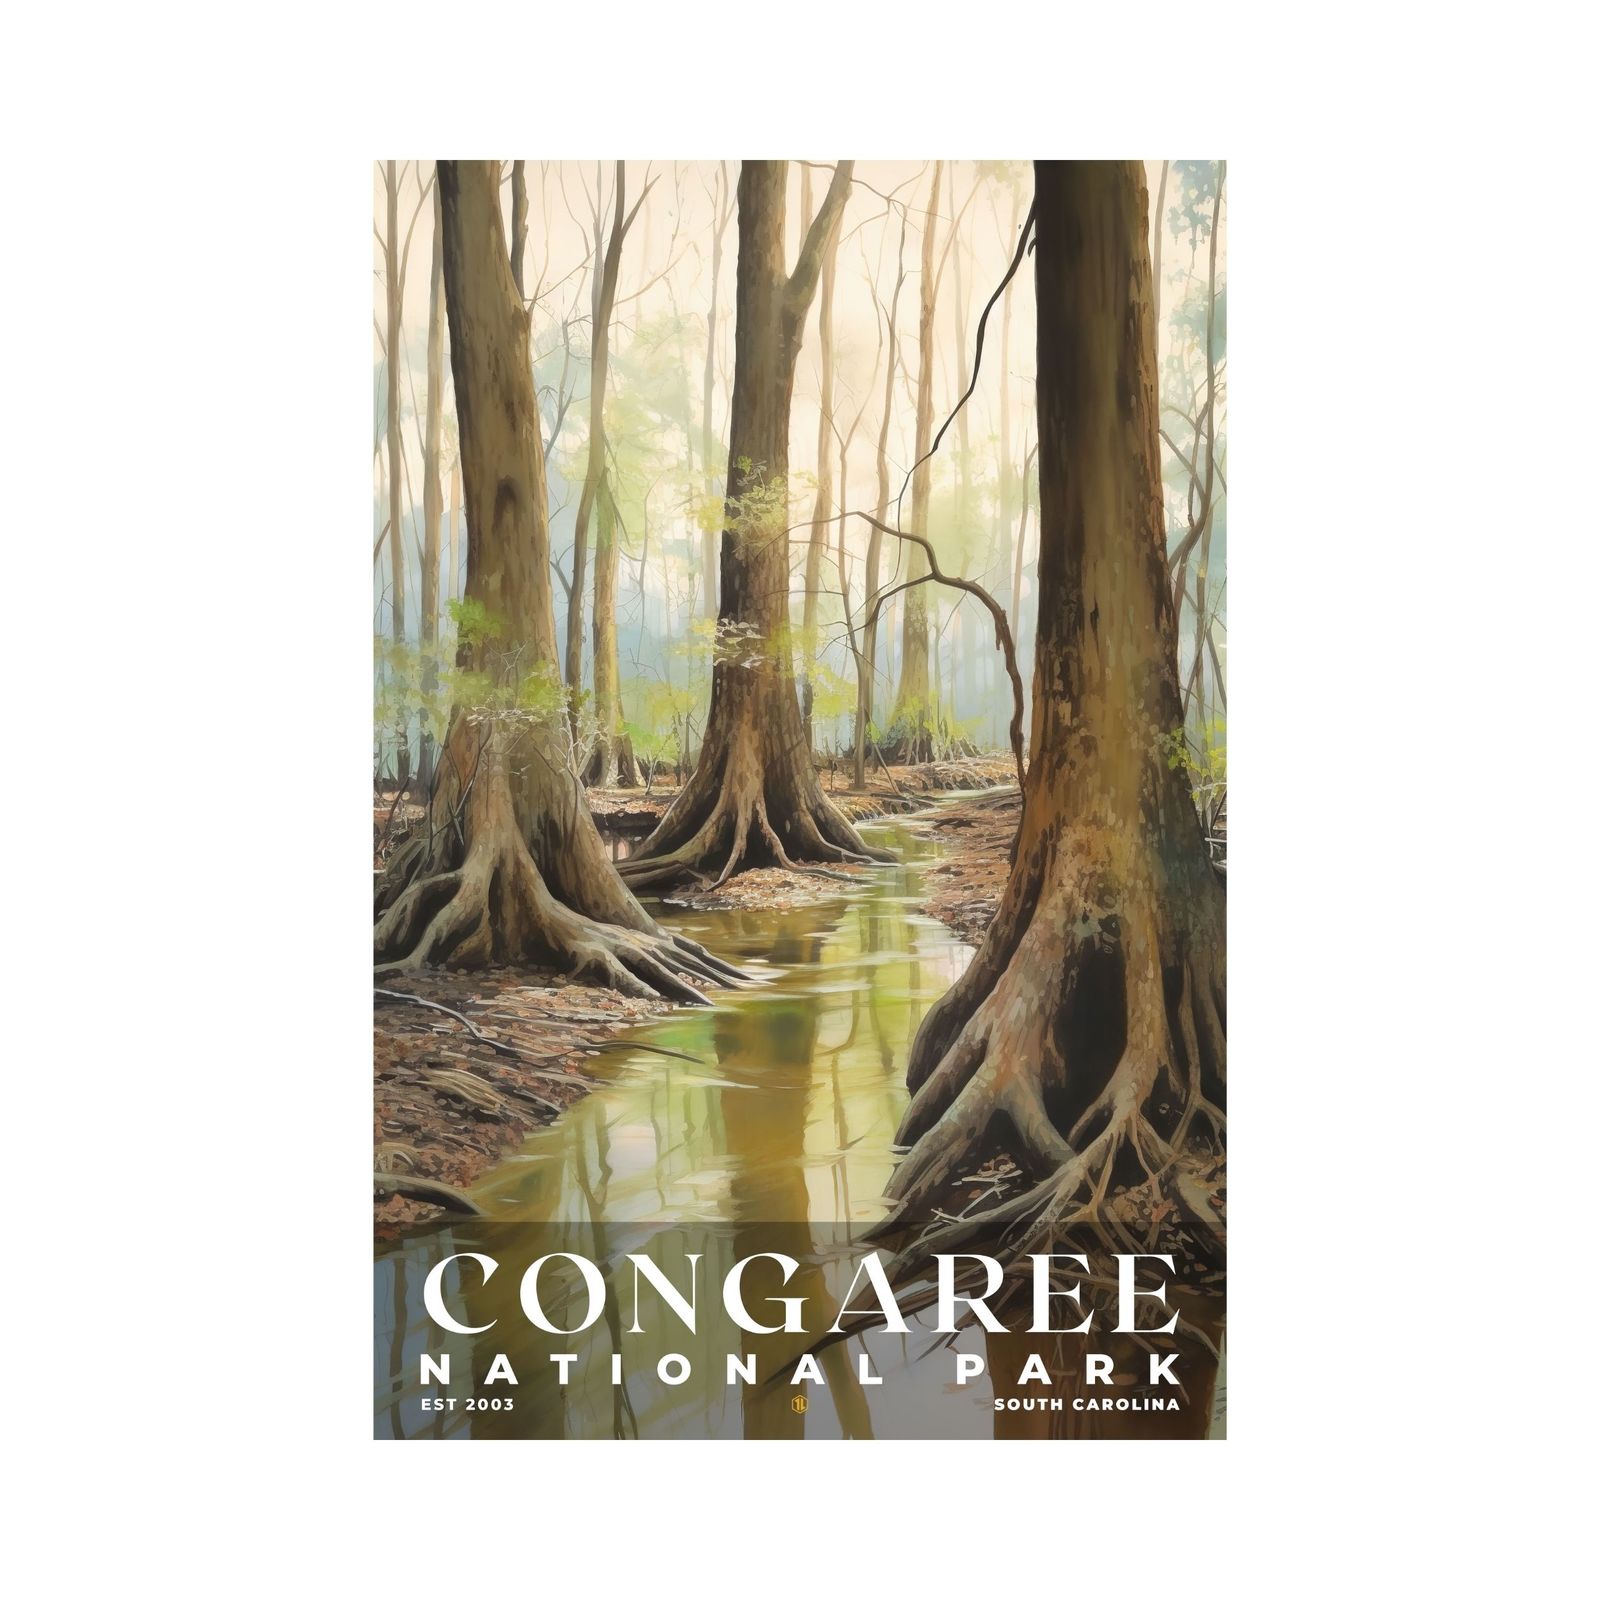 Primary image for Congaree National Park Poster | S02